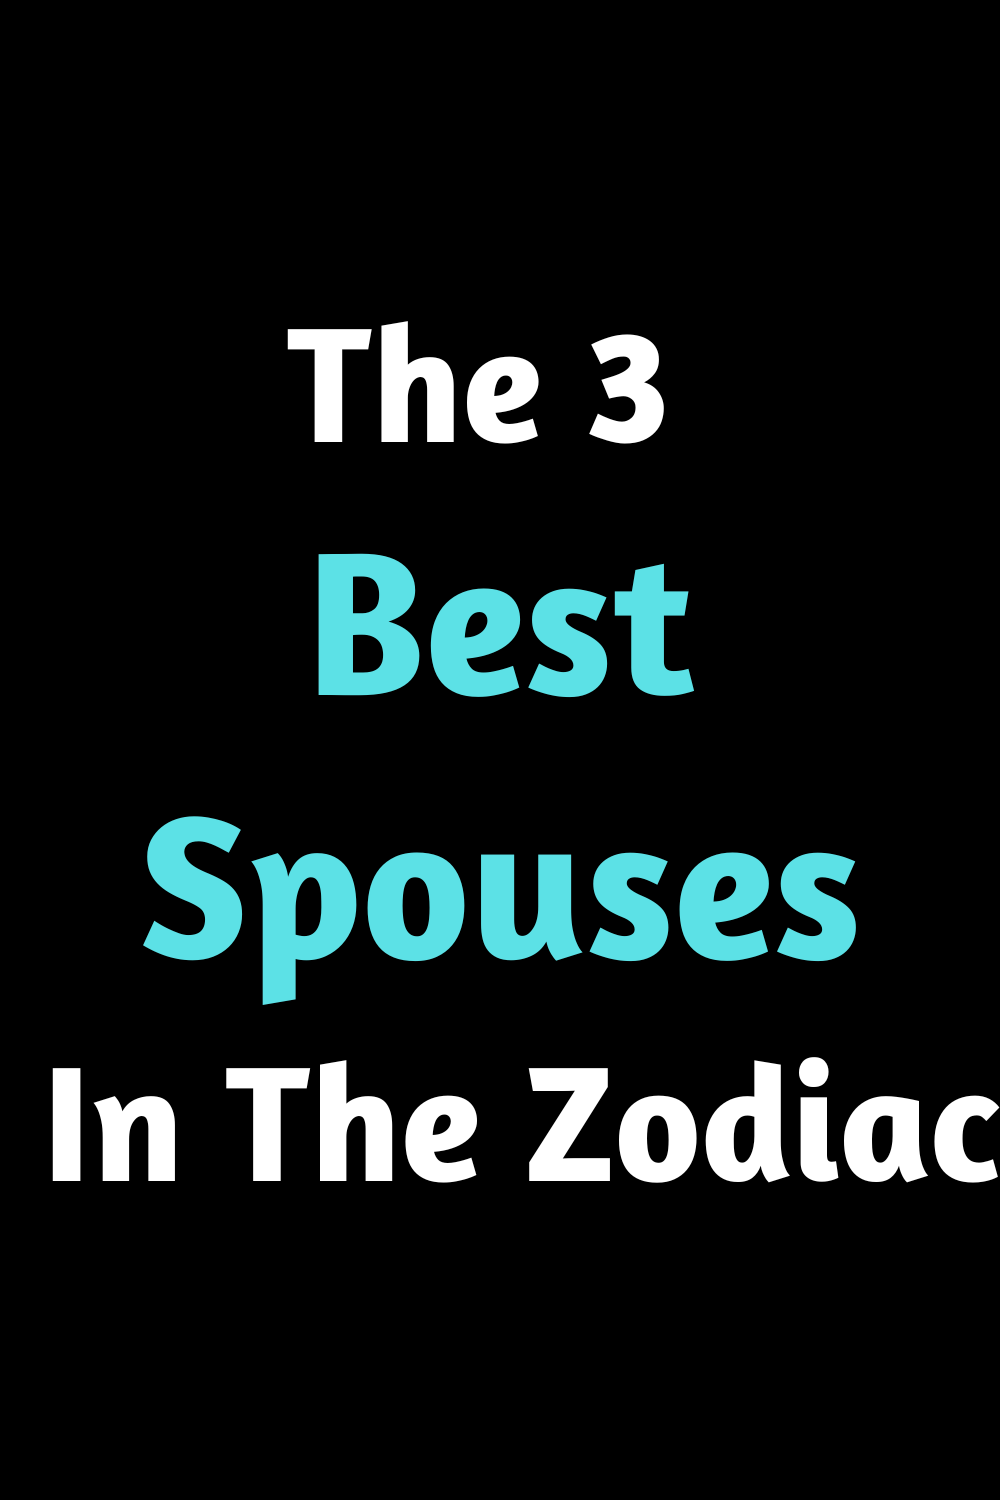 The 3 Best Spouses In The Zodiac